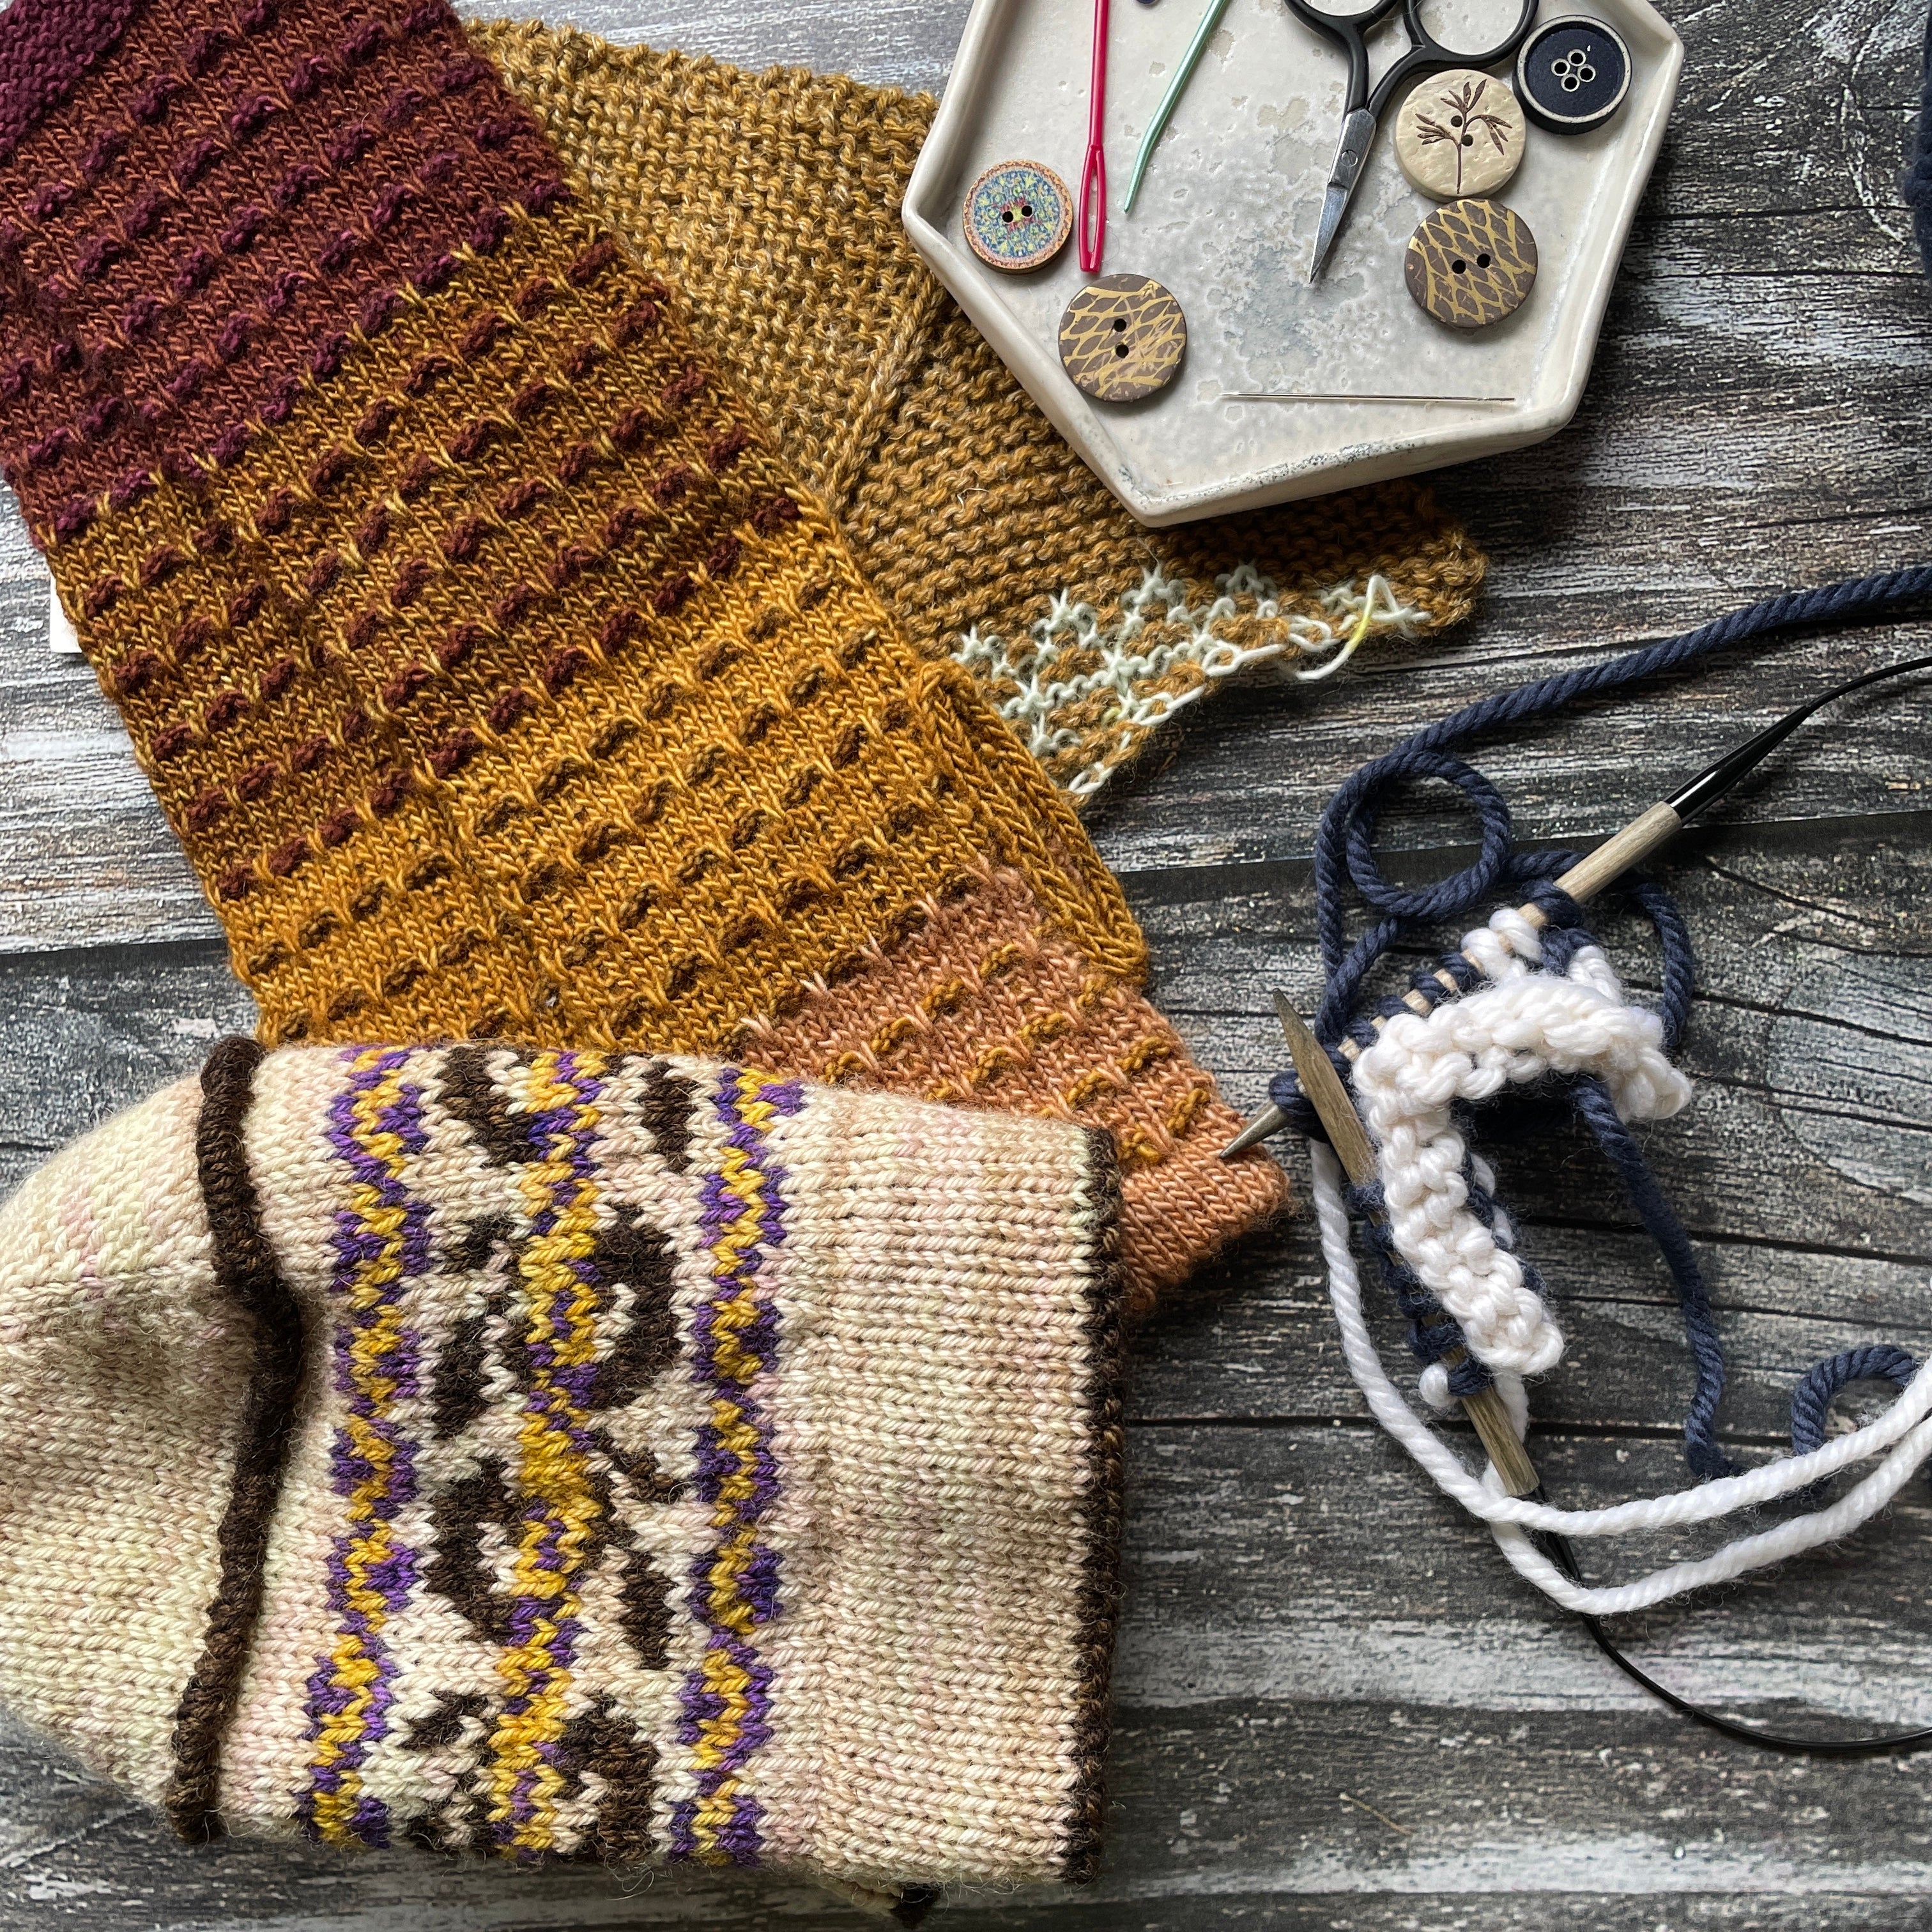 Learn to Knit: How to Trap Your Floats in Colourwork Knitting | Stolen Stitches Tutorial